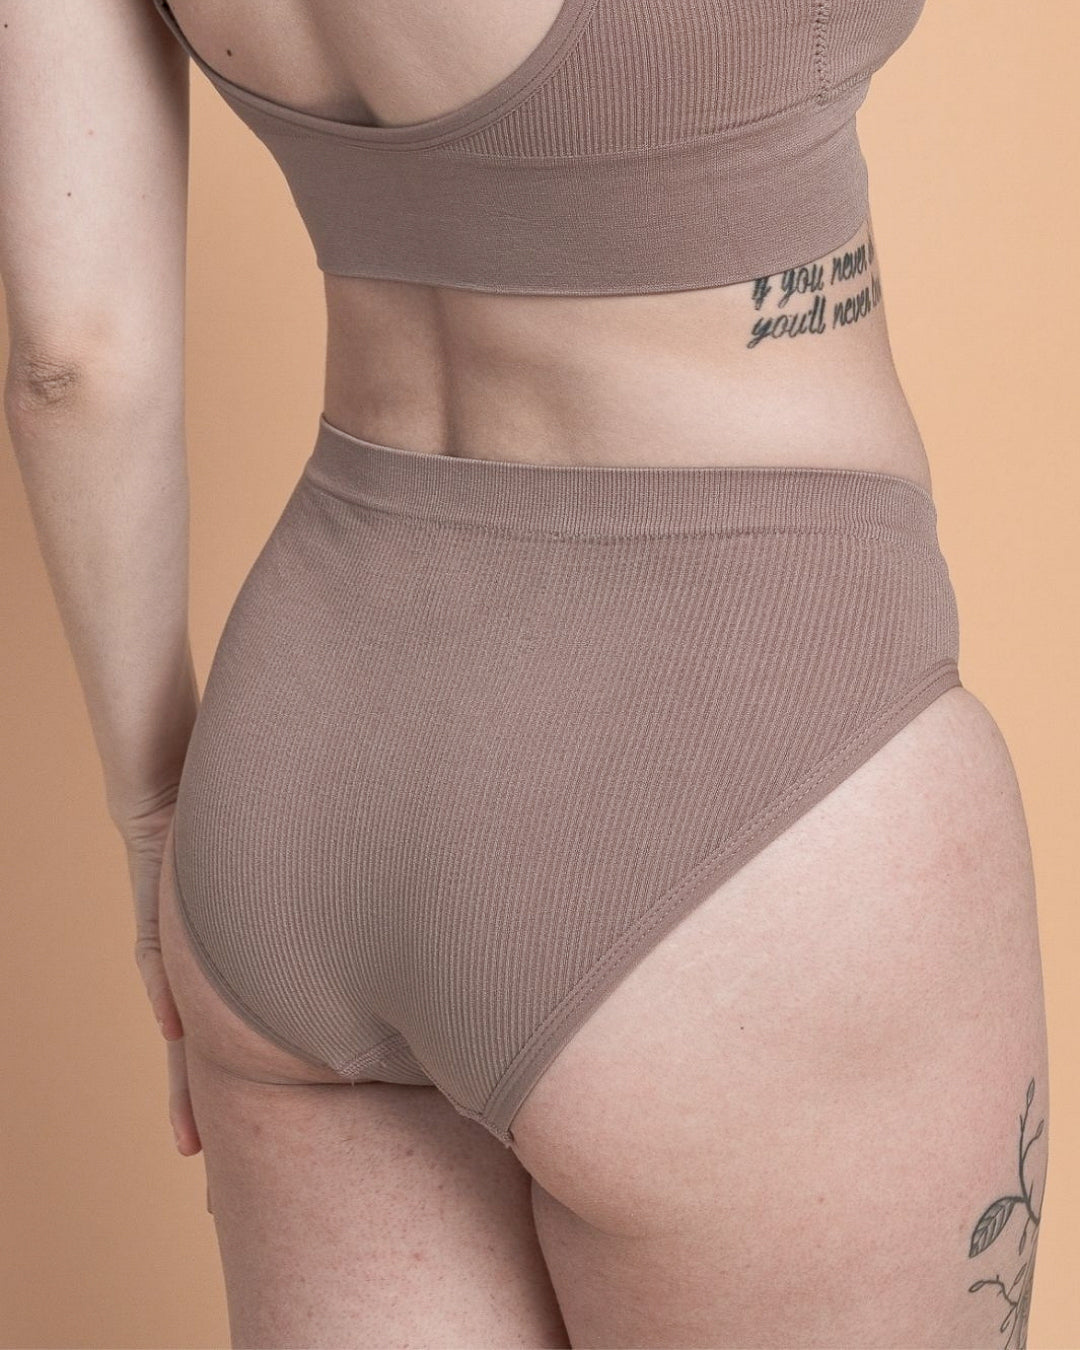 Buy Ultra Soft Hipster Underwear by Seamless Lingerie